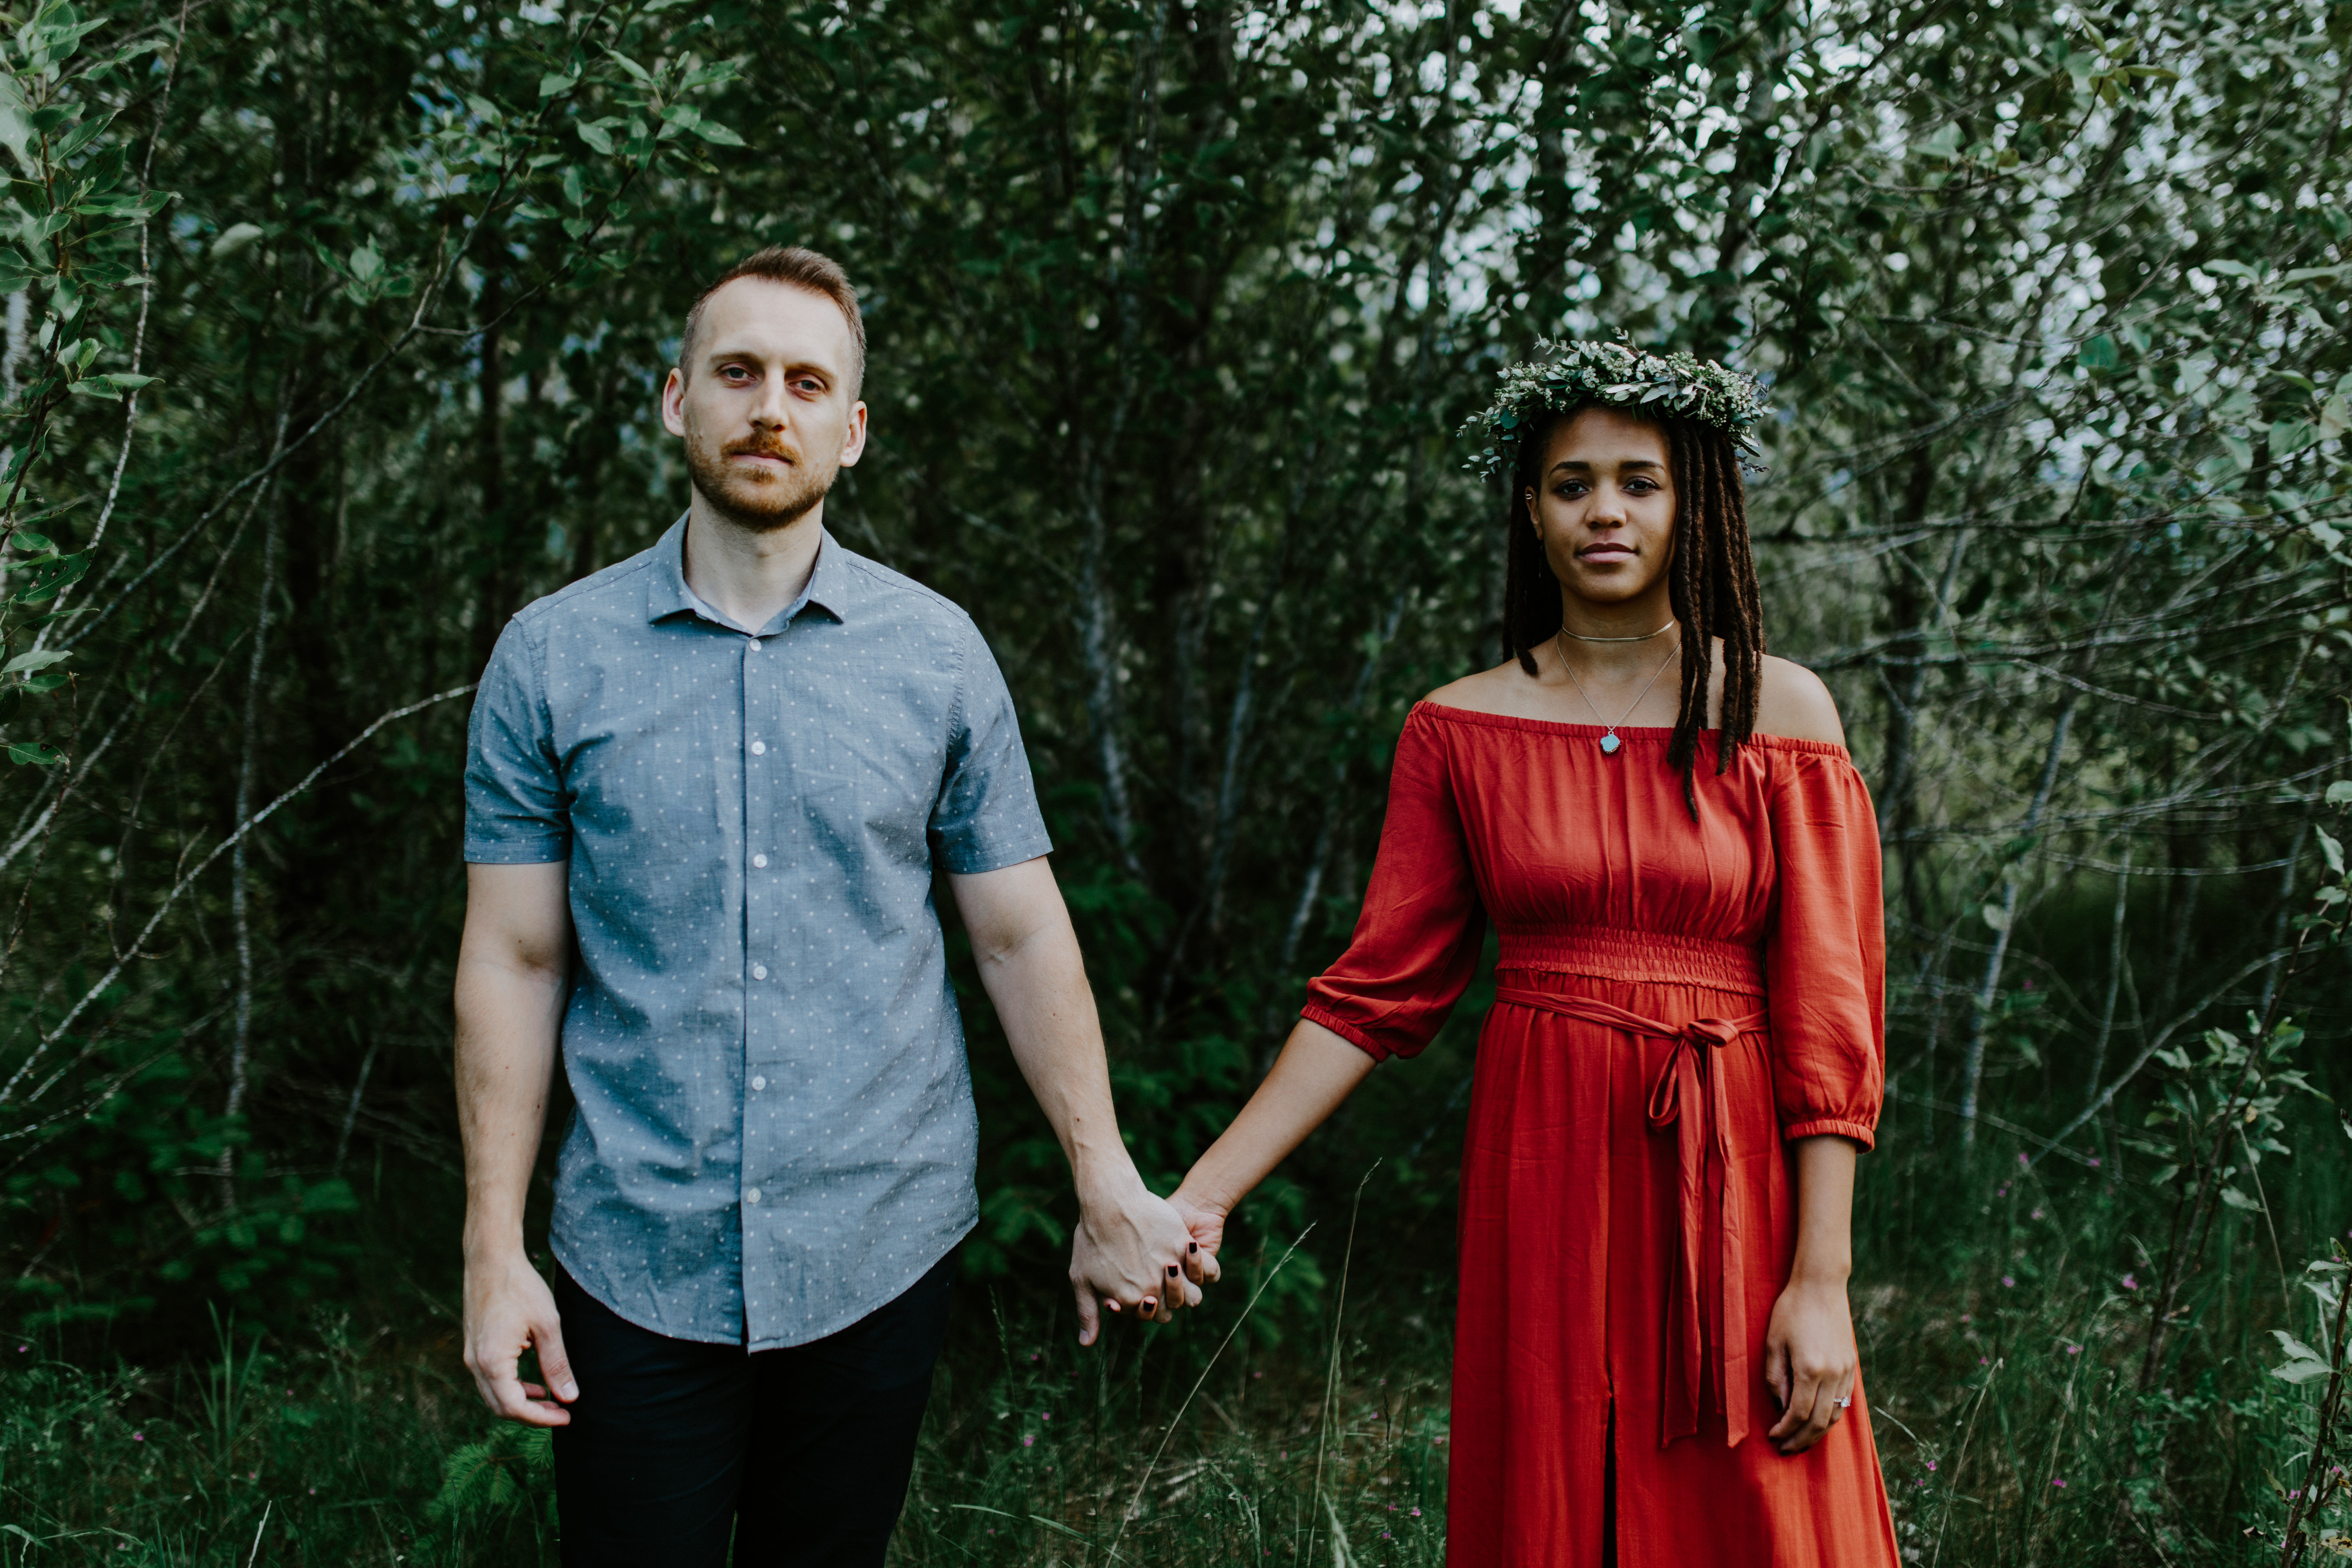 Kayloni and Garrett hold hands at Cascade Locks, Oregon during their elopement. Engagement photography in Portland Oregon by Sienna Plus Josh.